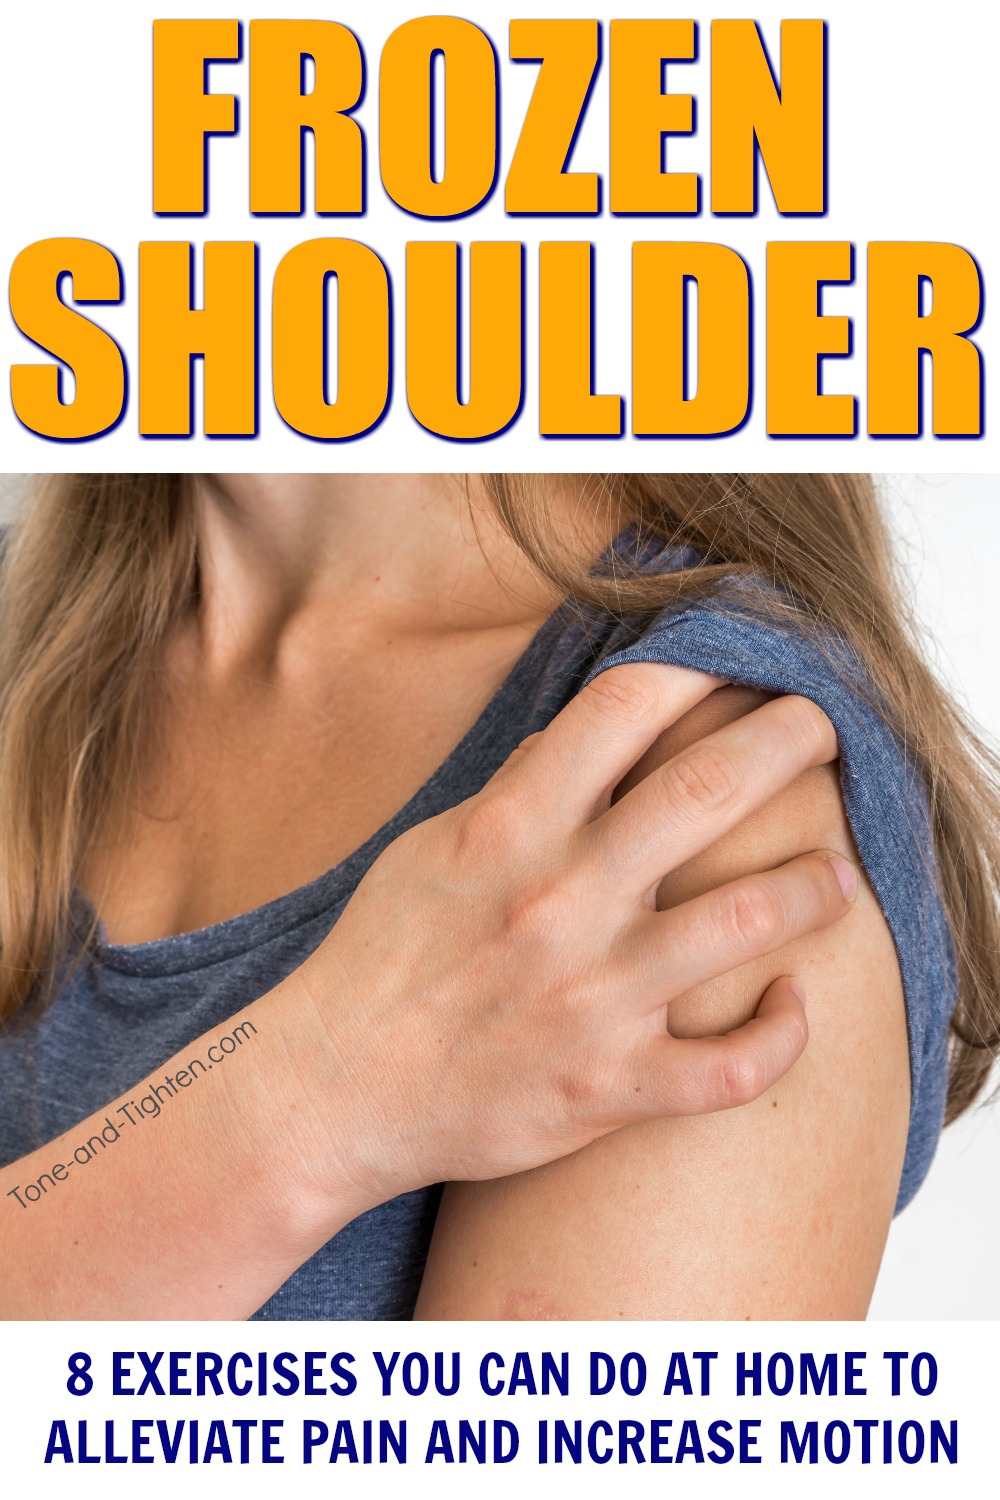 The best home stretches and exercises to fix frozen shoulder. From the doctor of physical therapy at Tone-and-Tighten.com